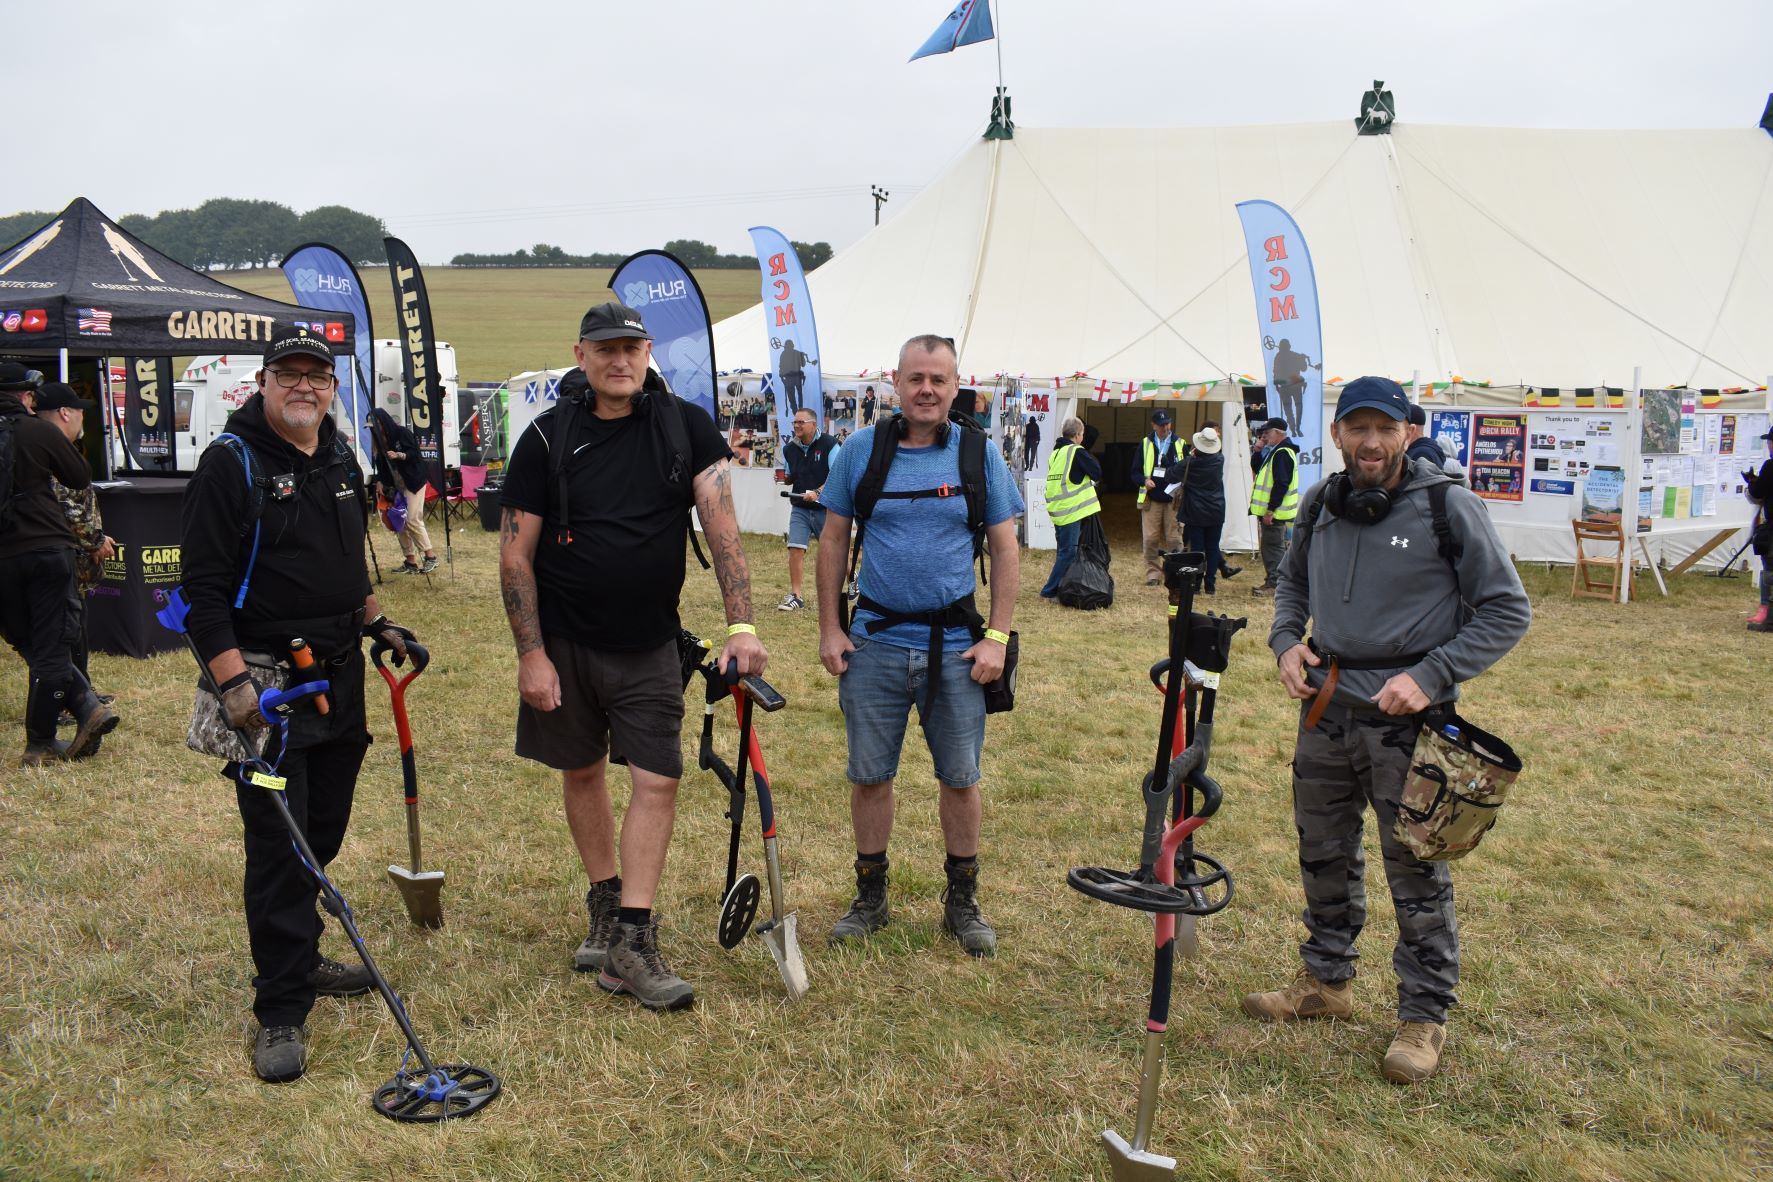 Metal Detecting Rally raises over £80,000 for Cancer Services at RUH